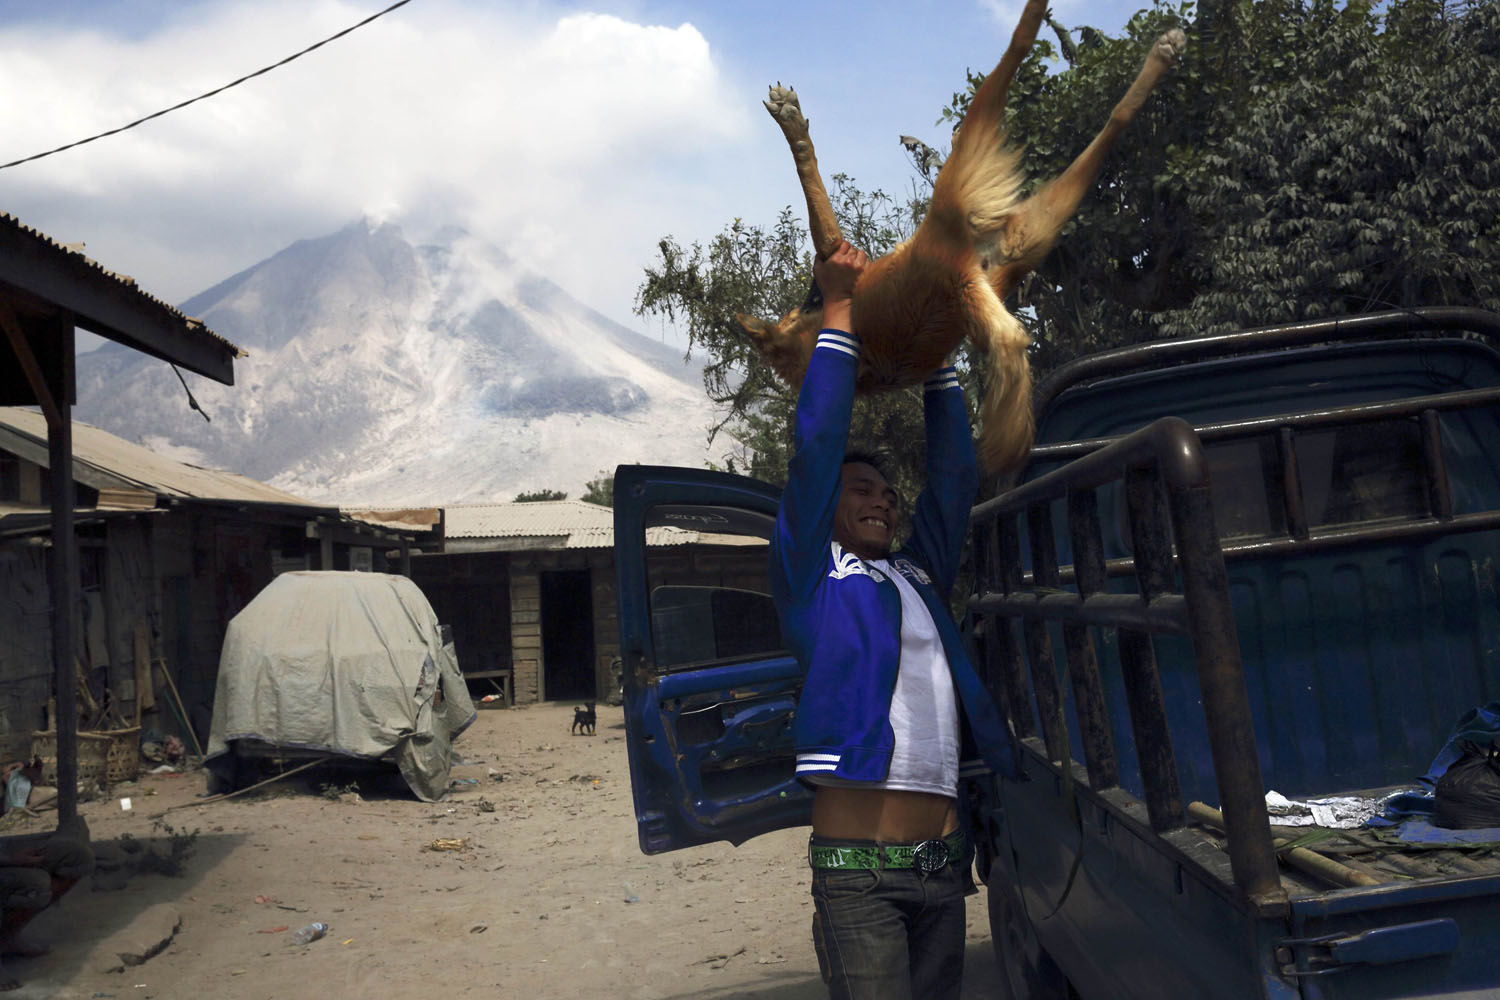 A villager lifts his dog onto a truck to evacuate as Mount Sinabung spews ash at Pintu Besi village in Karo district